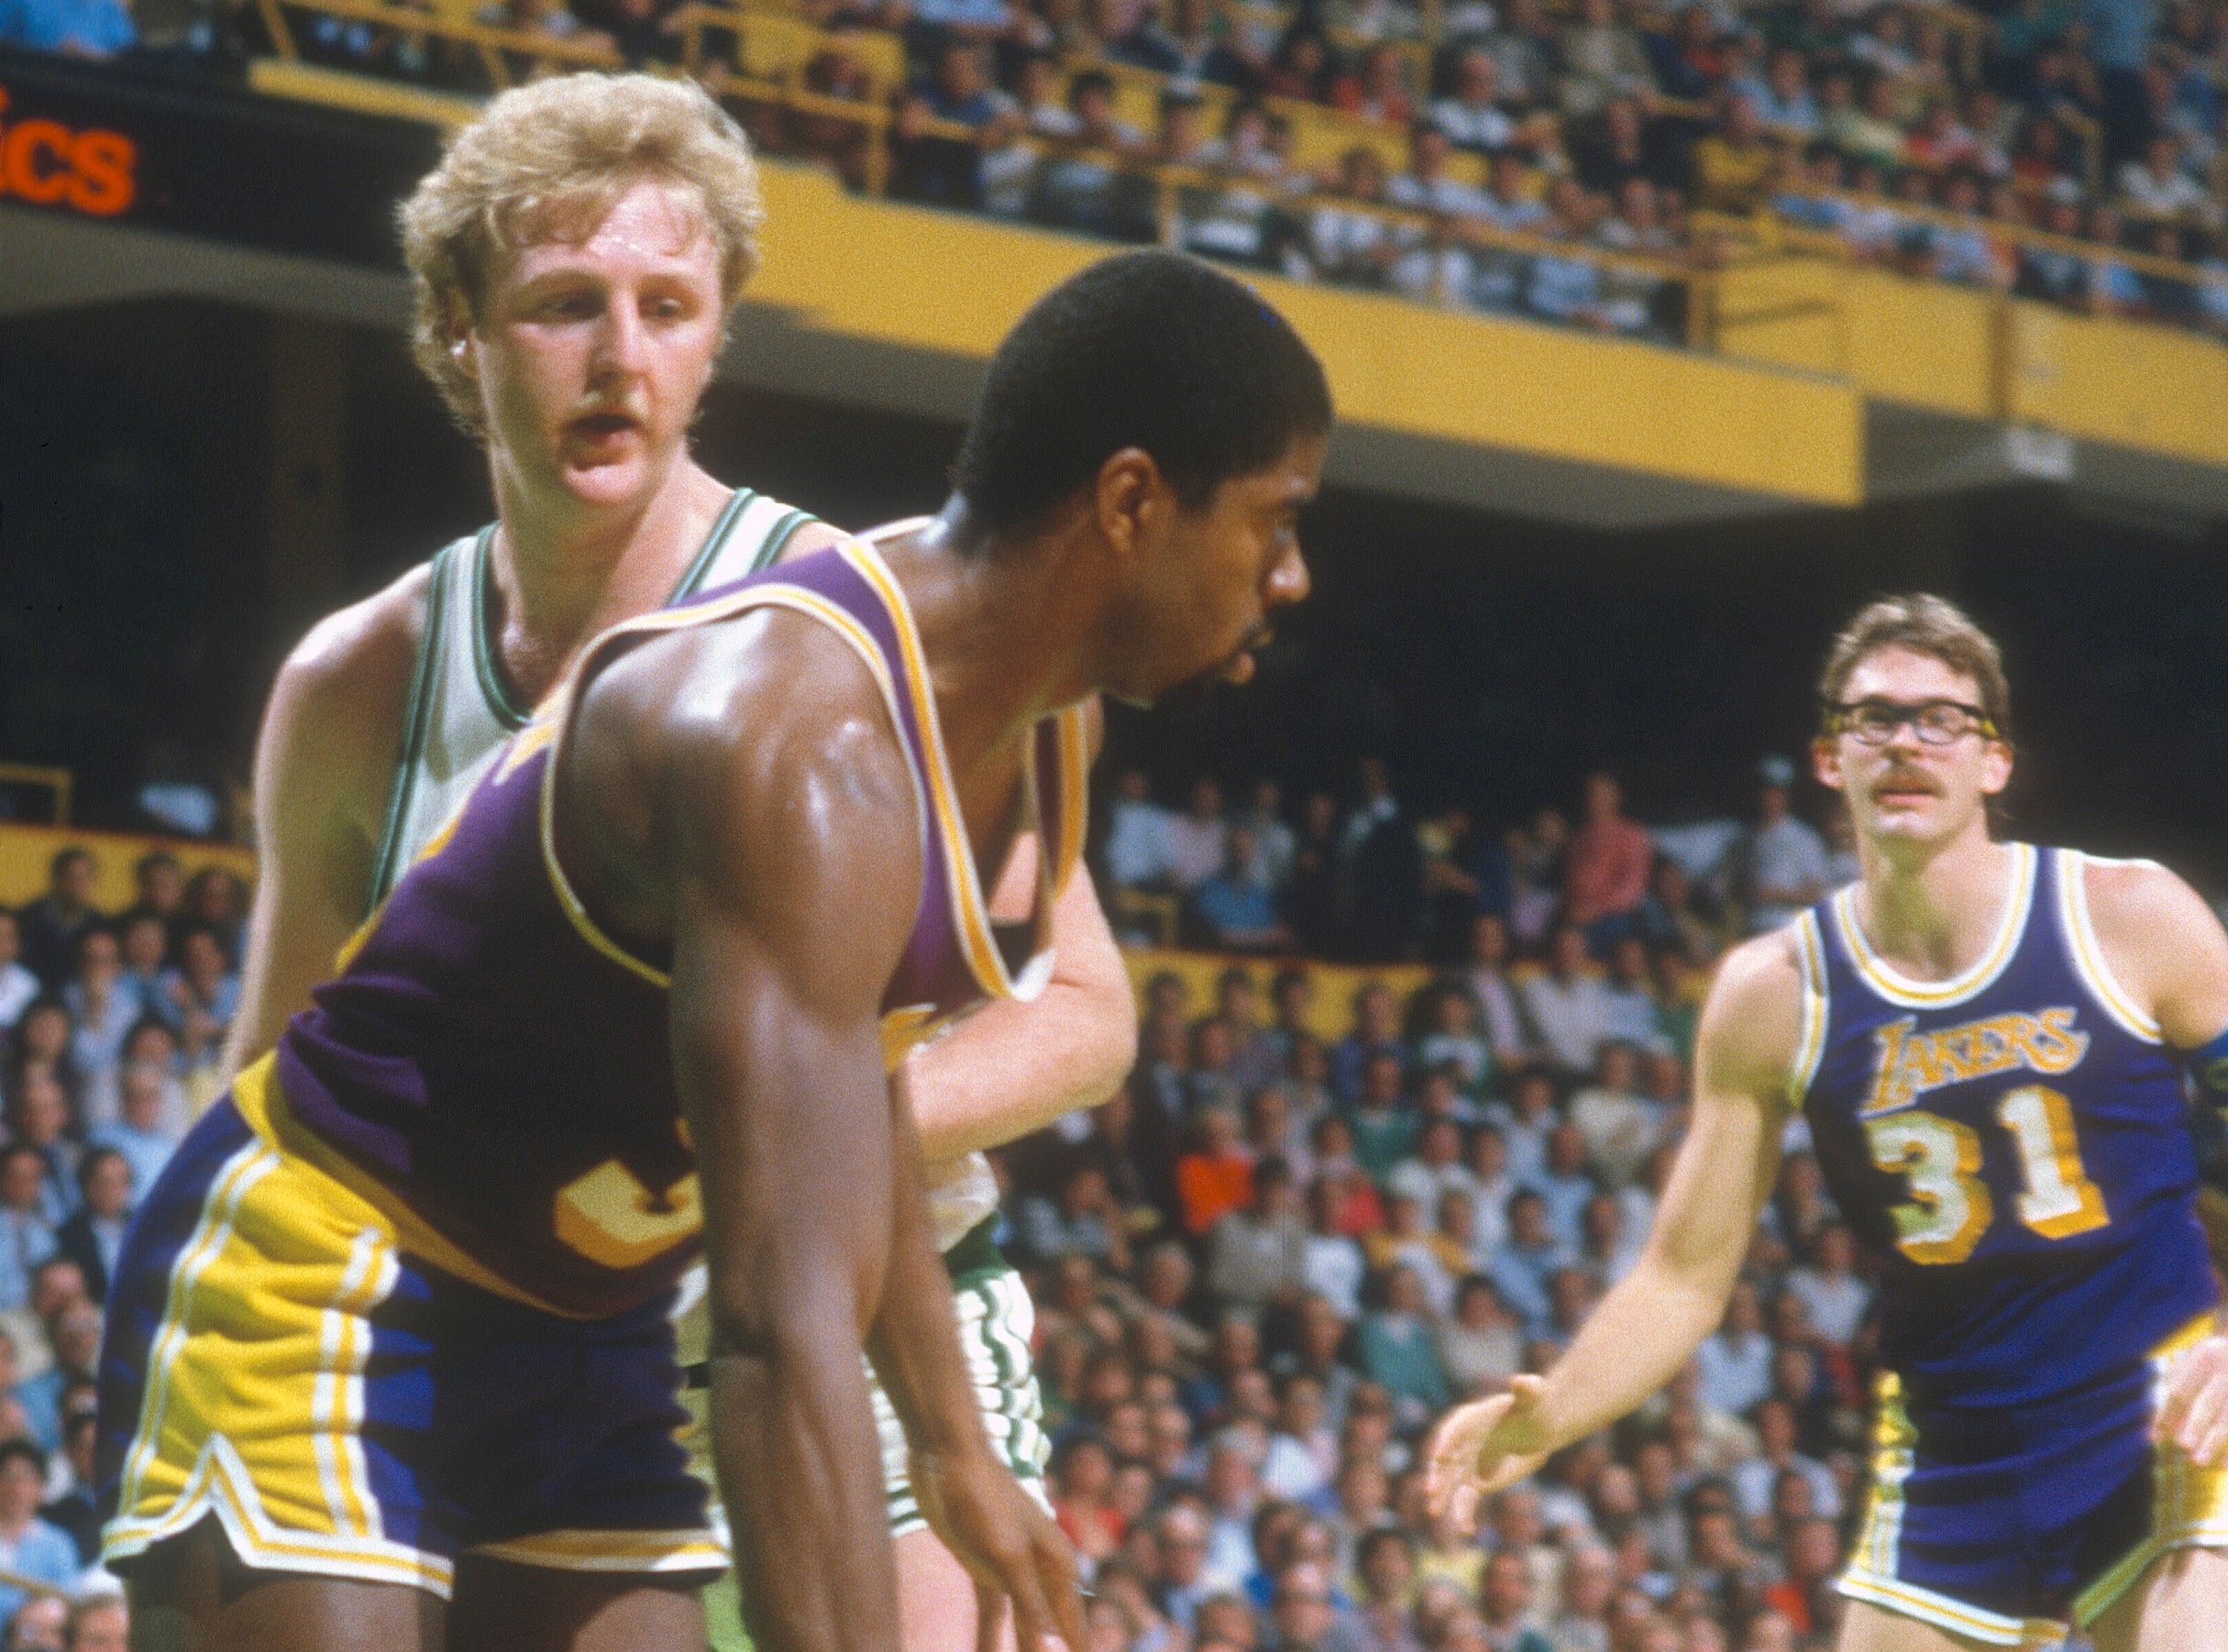 Magic Johnson of the Los Angeles Lakers dribbles the ball while closely guarded by Larry Bird of the Boston Celtics.